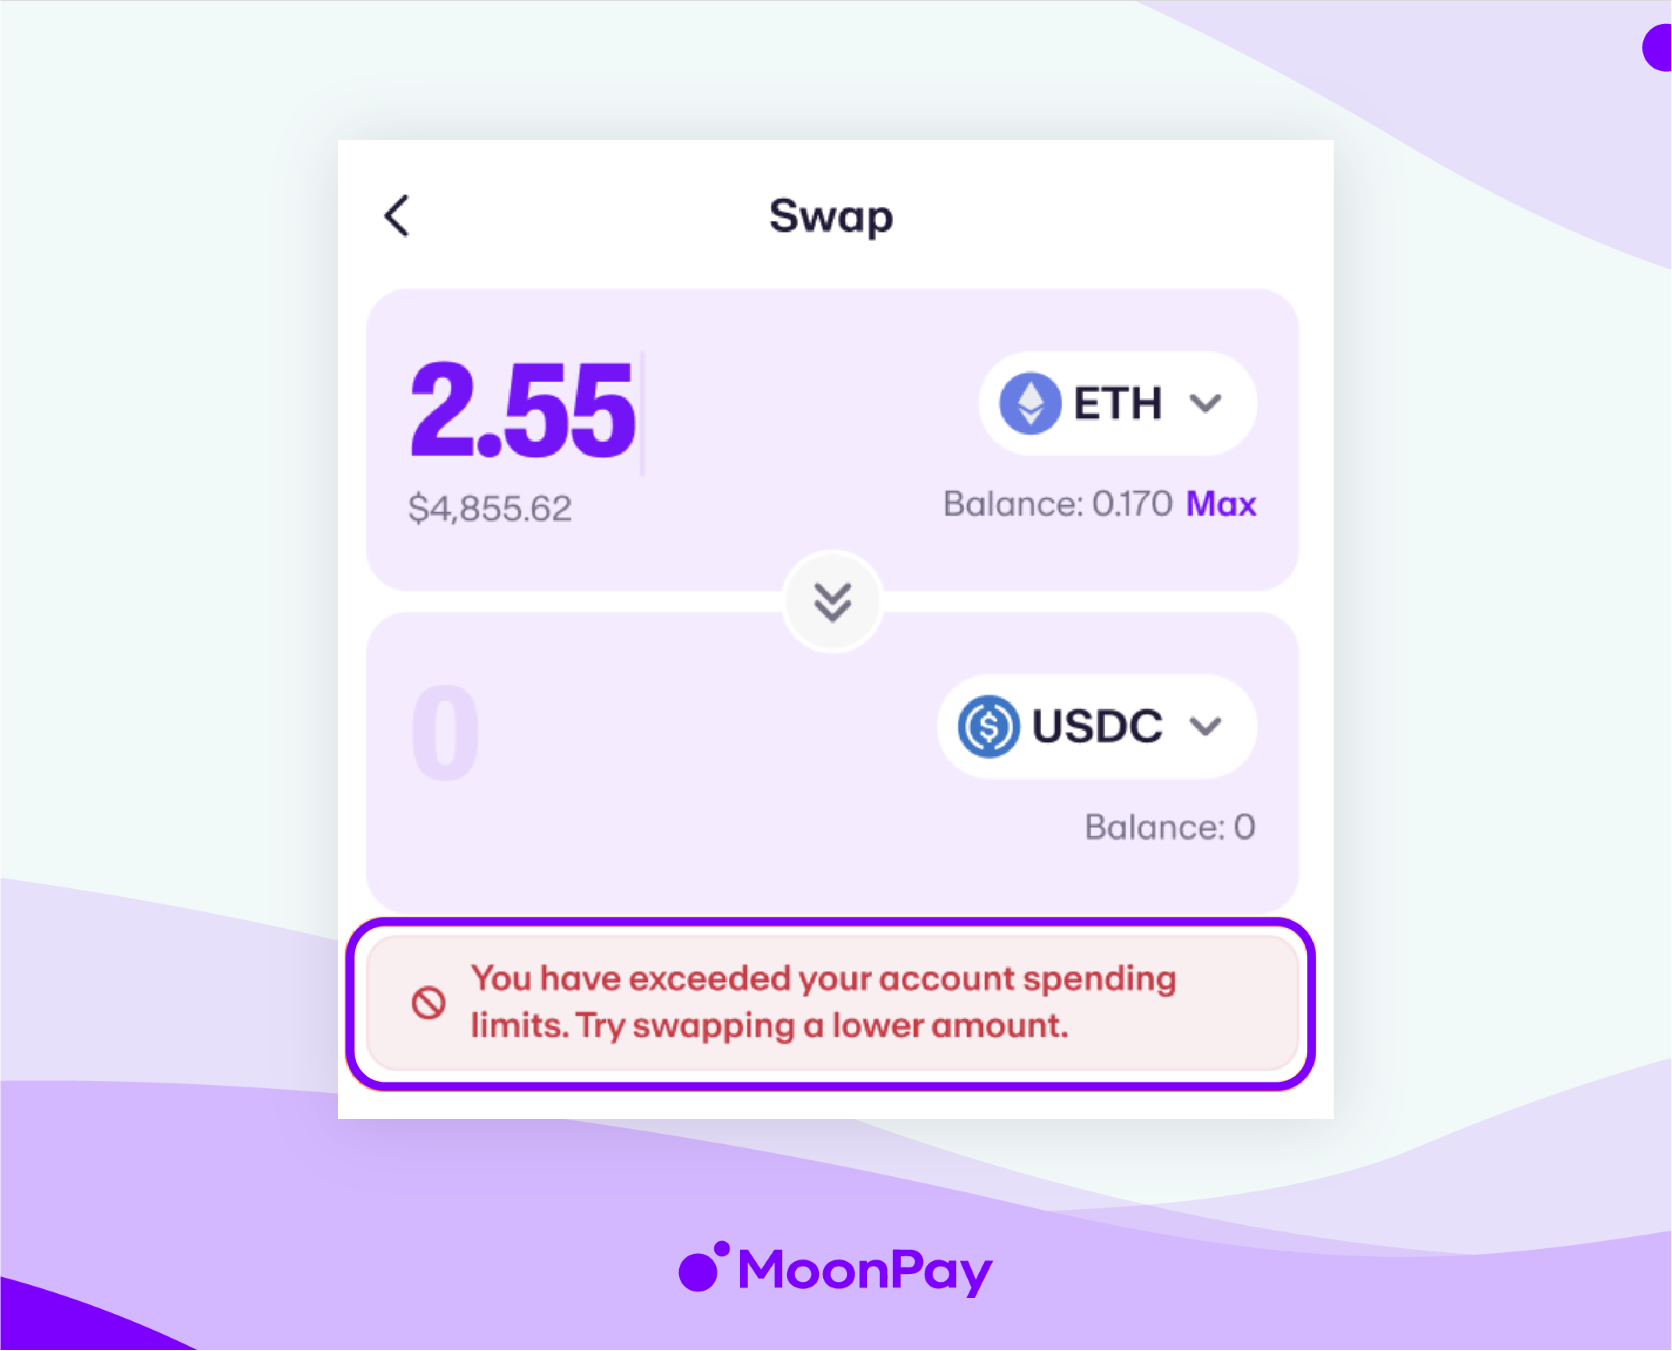 MoonPay's app window shows the amount of inputs that exceed the account's swap limits.